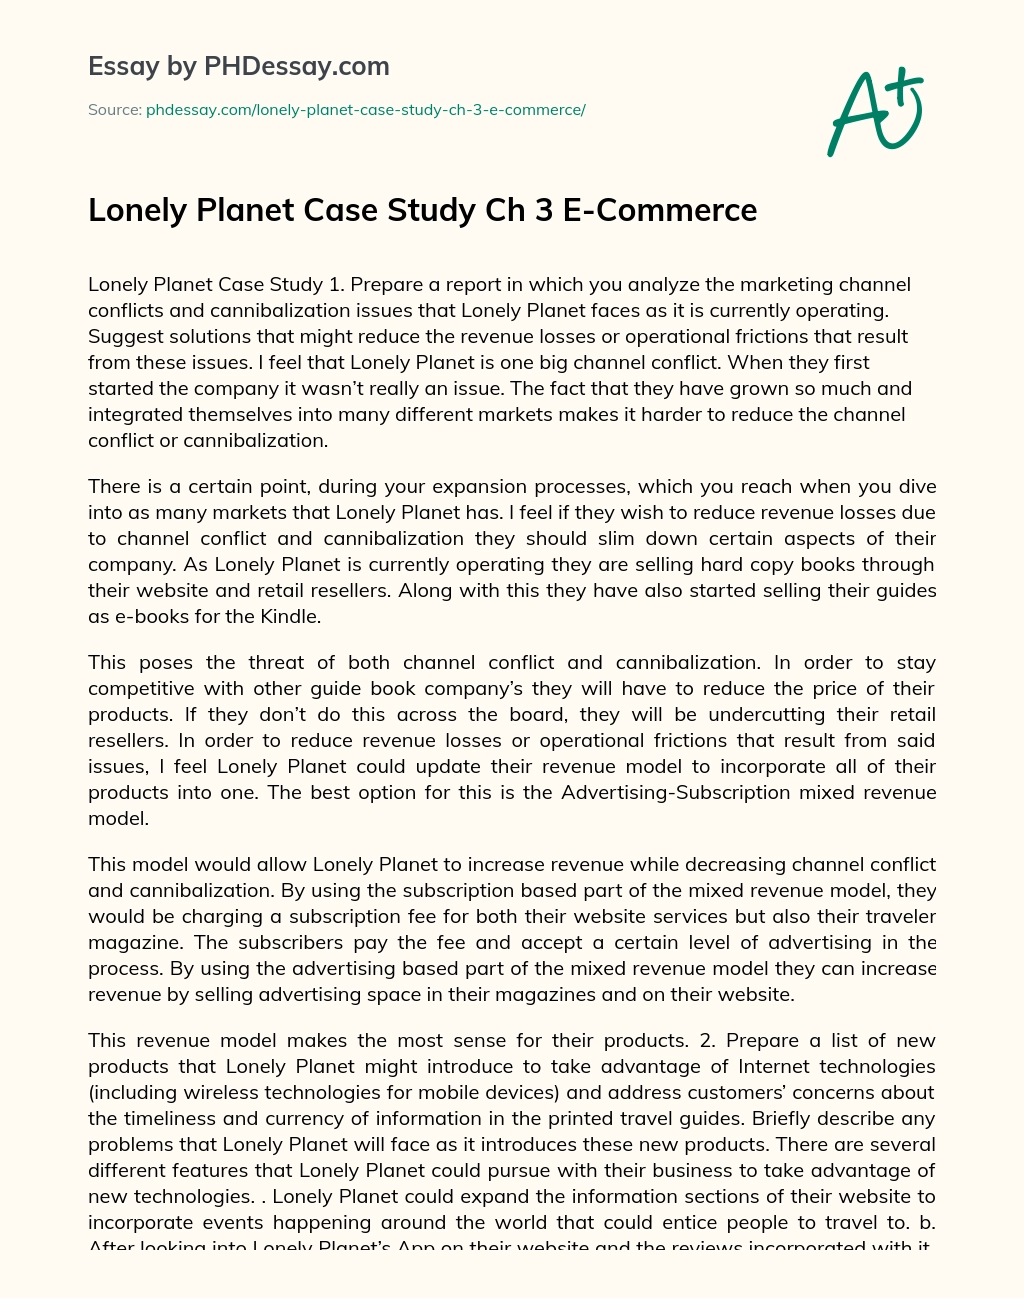 Lonely Planet Case Study essay